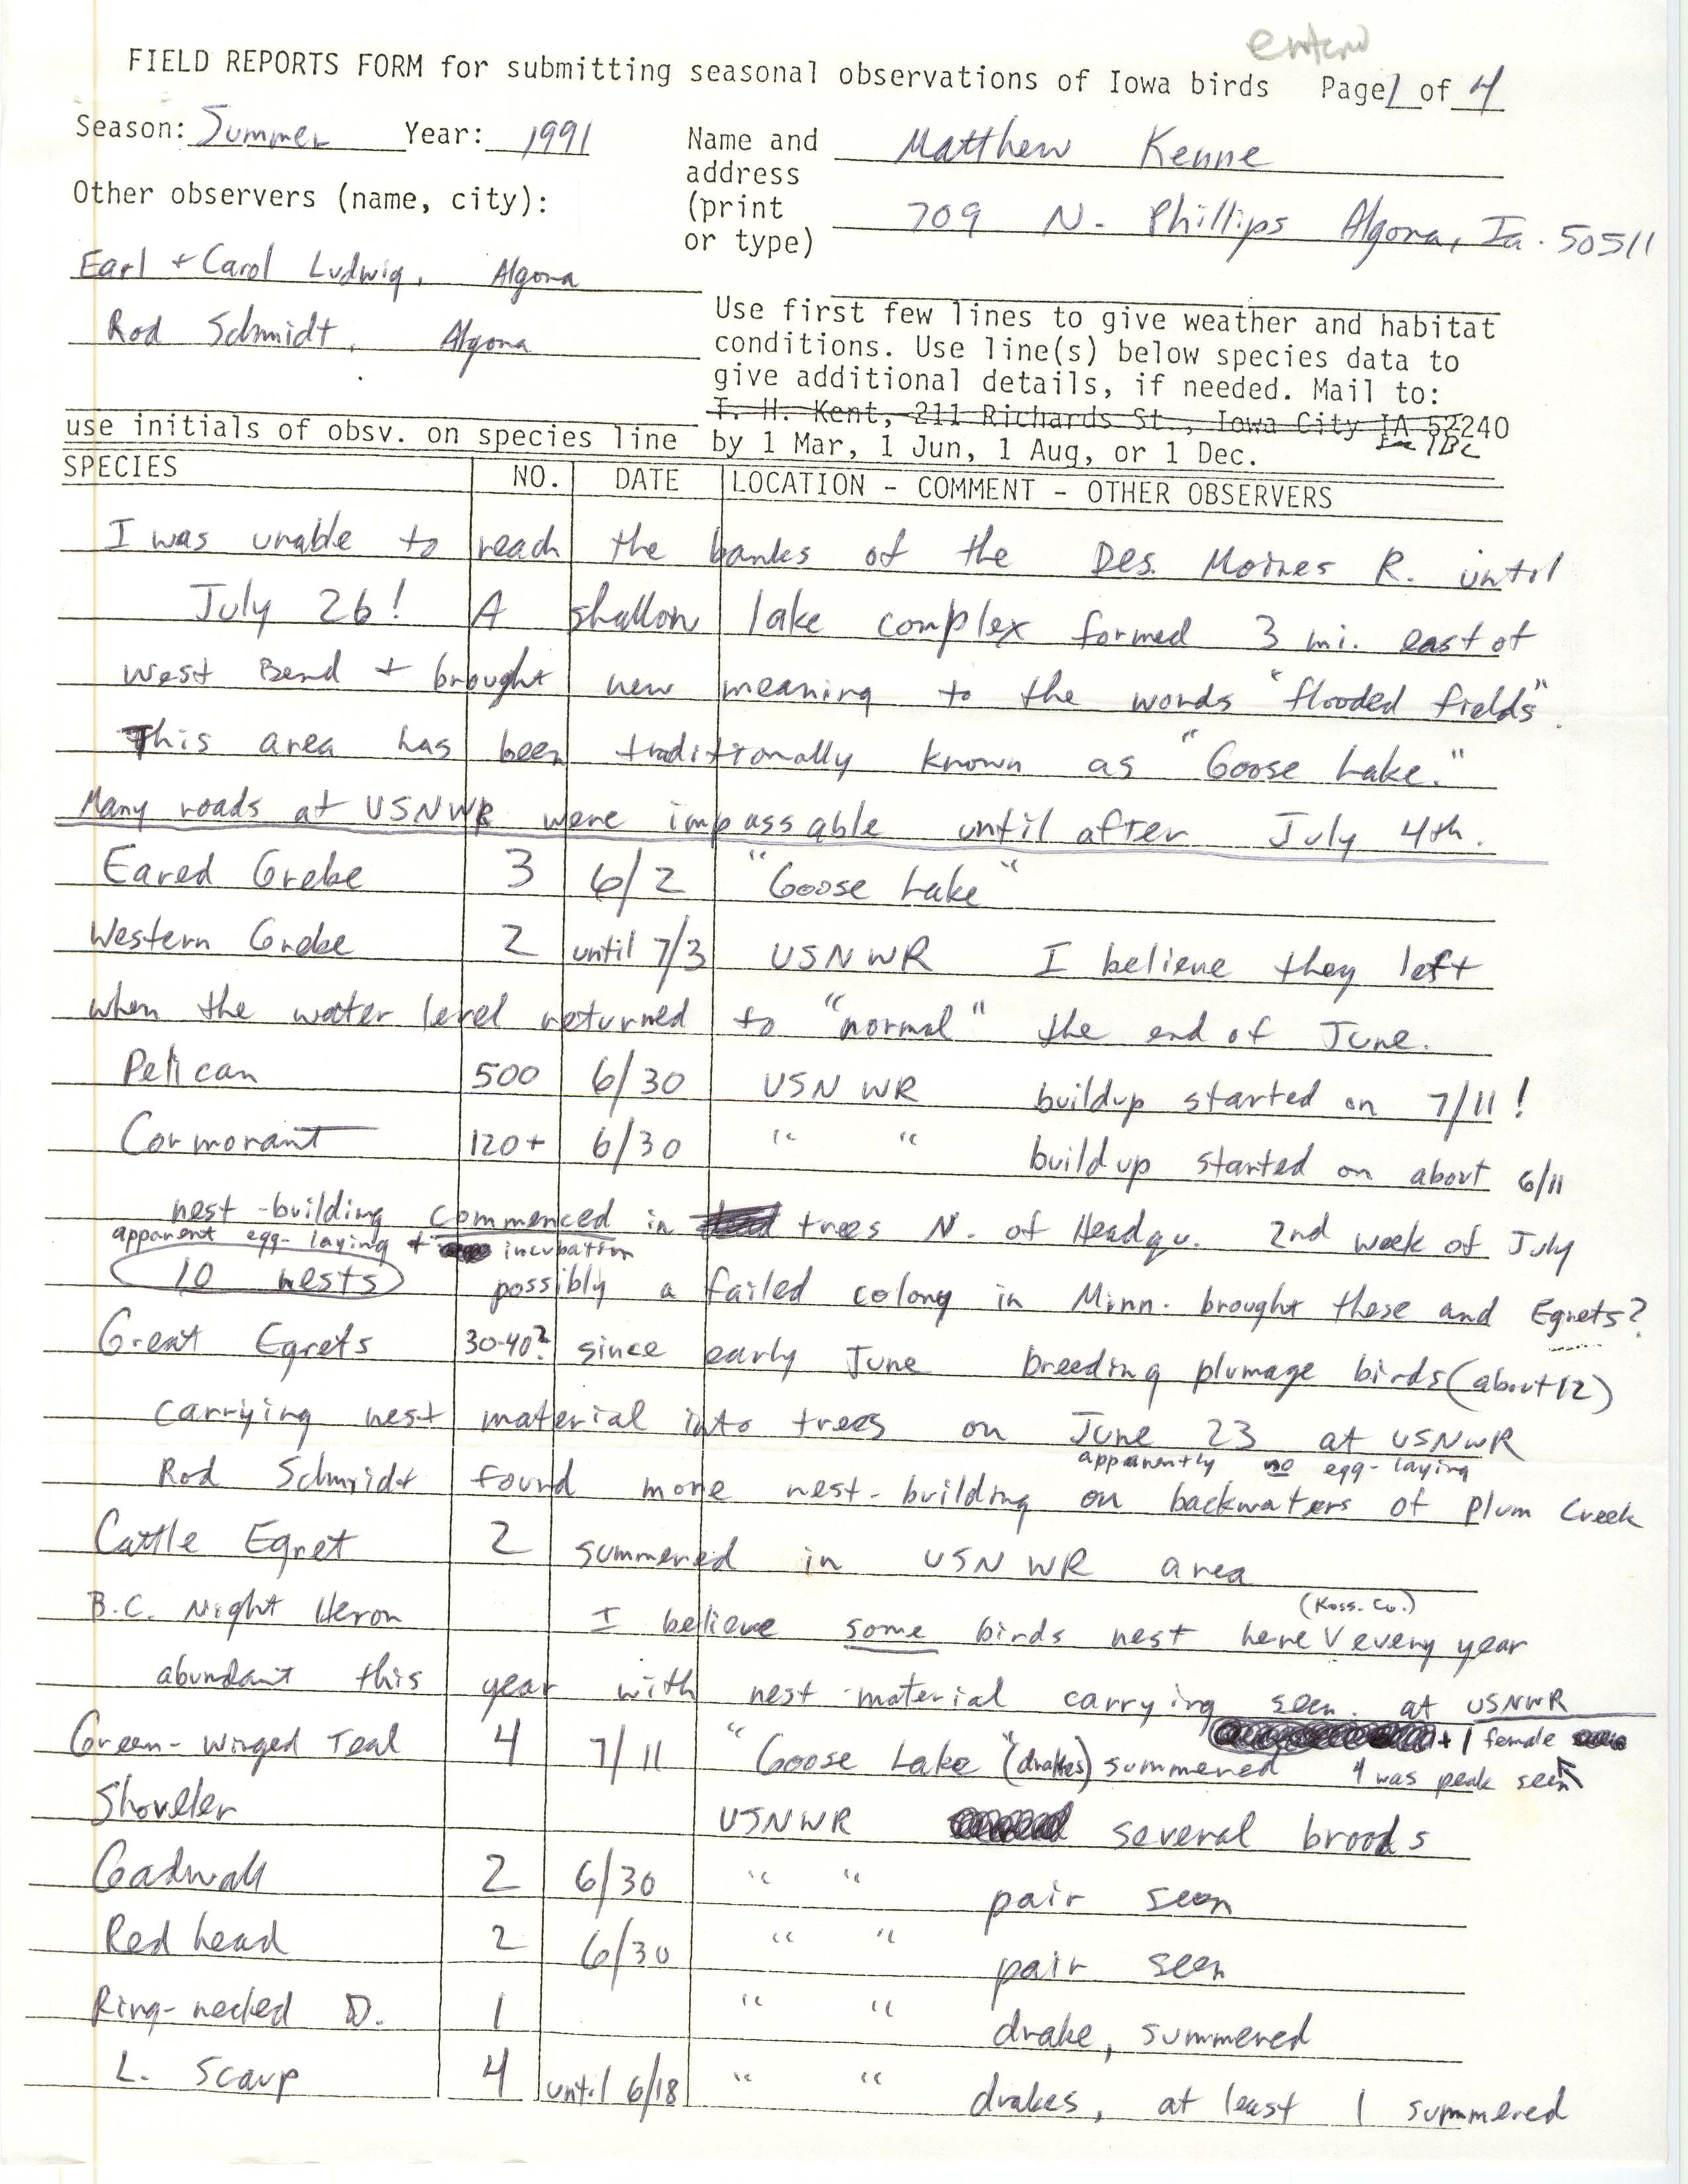 Field reports form for submitting seasonal observations of Iowa birds, Matthew Kenne, summer 1991